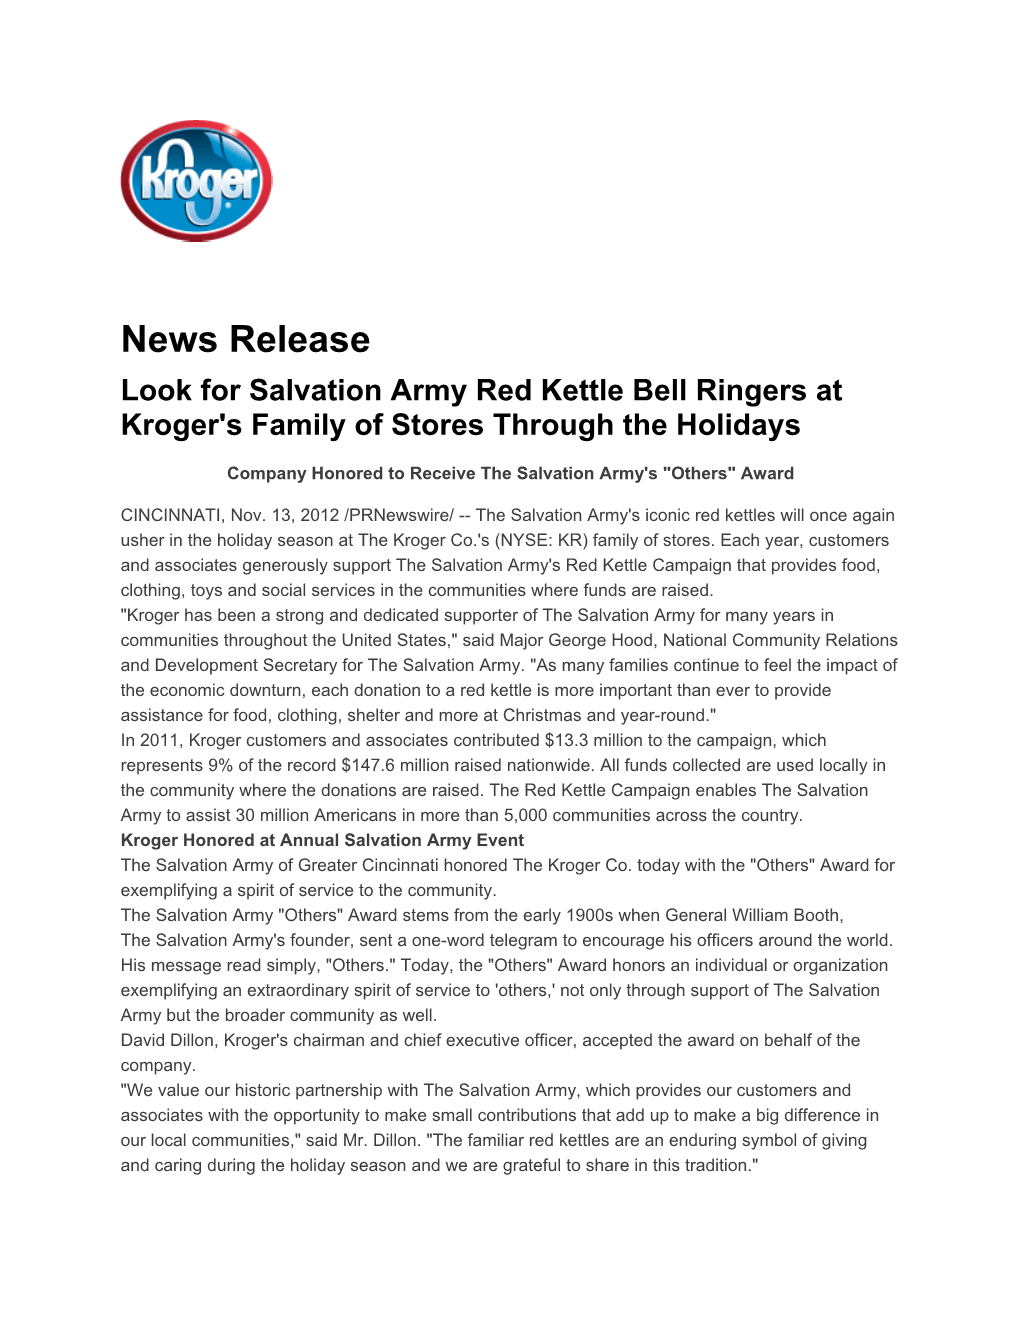 News Release Look for Salvation Army Red Kettle Bell Ringers at Kroger's Family of Stores Through the Holidays